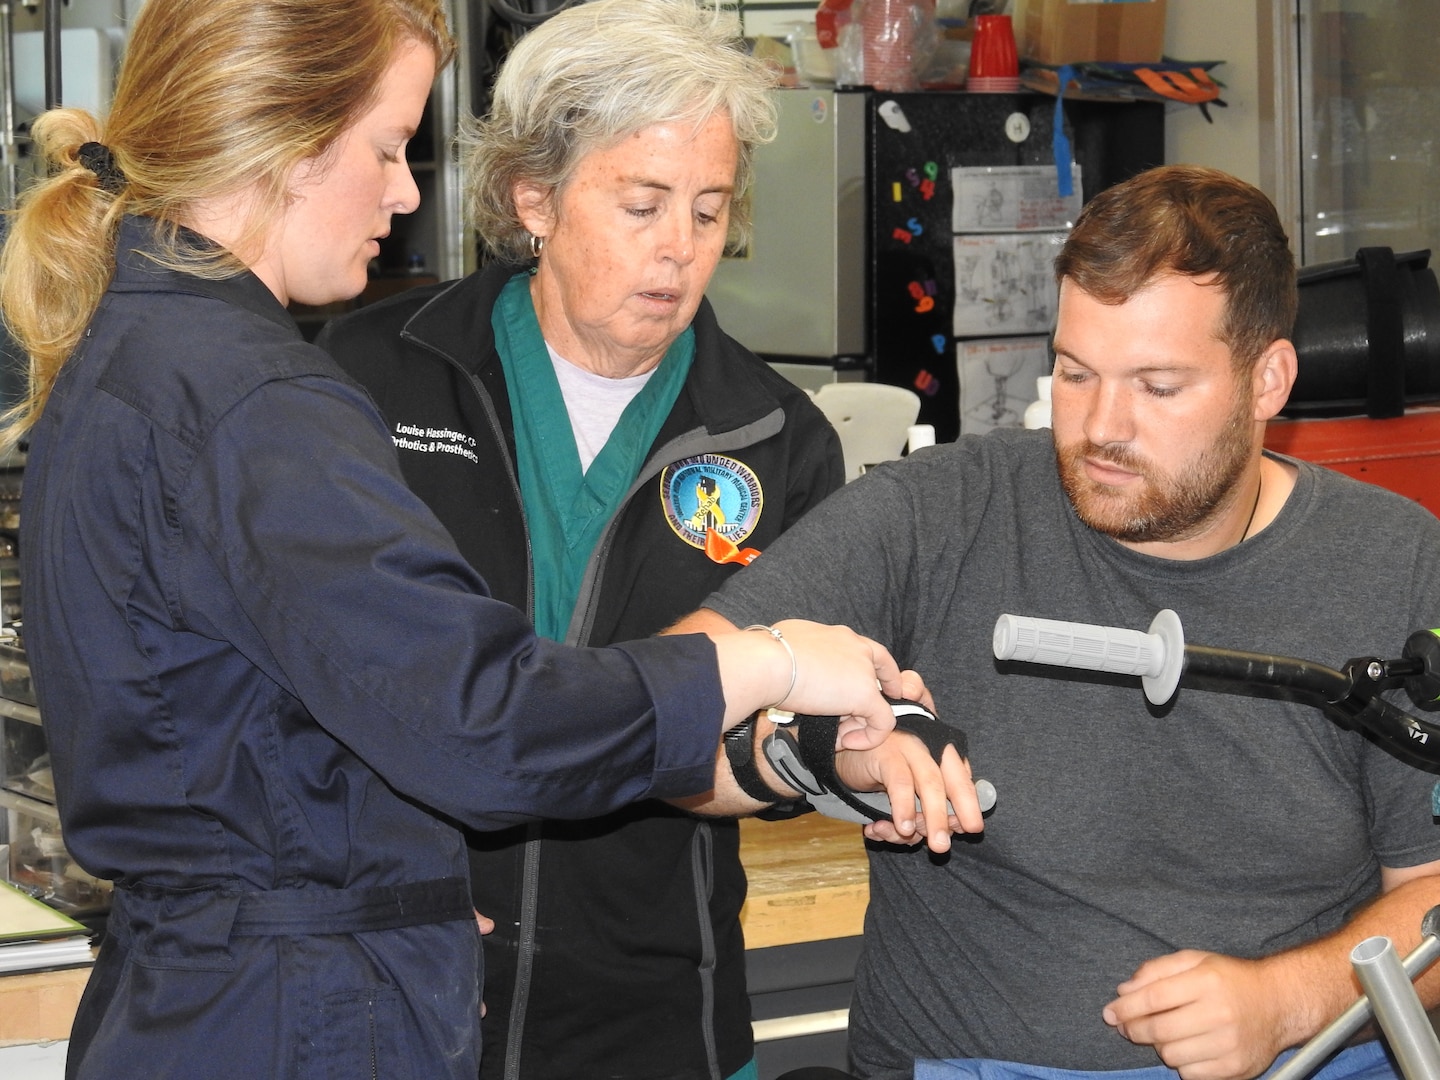 Walter Reed's Abigail Hinson (left), prosthetic technician in the Orthotics and Prosthetics Lab, and Louise Hassinger, prosthesis technology specialist, are working with the medical center's 3D Medical Applications Center on a special prosthetic designed for Ryan Pelzer to help him shift gears and get back into motocross racing.